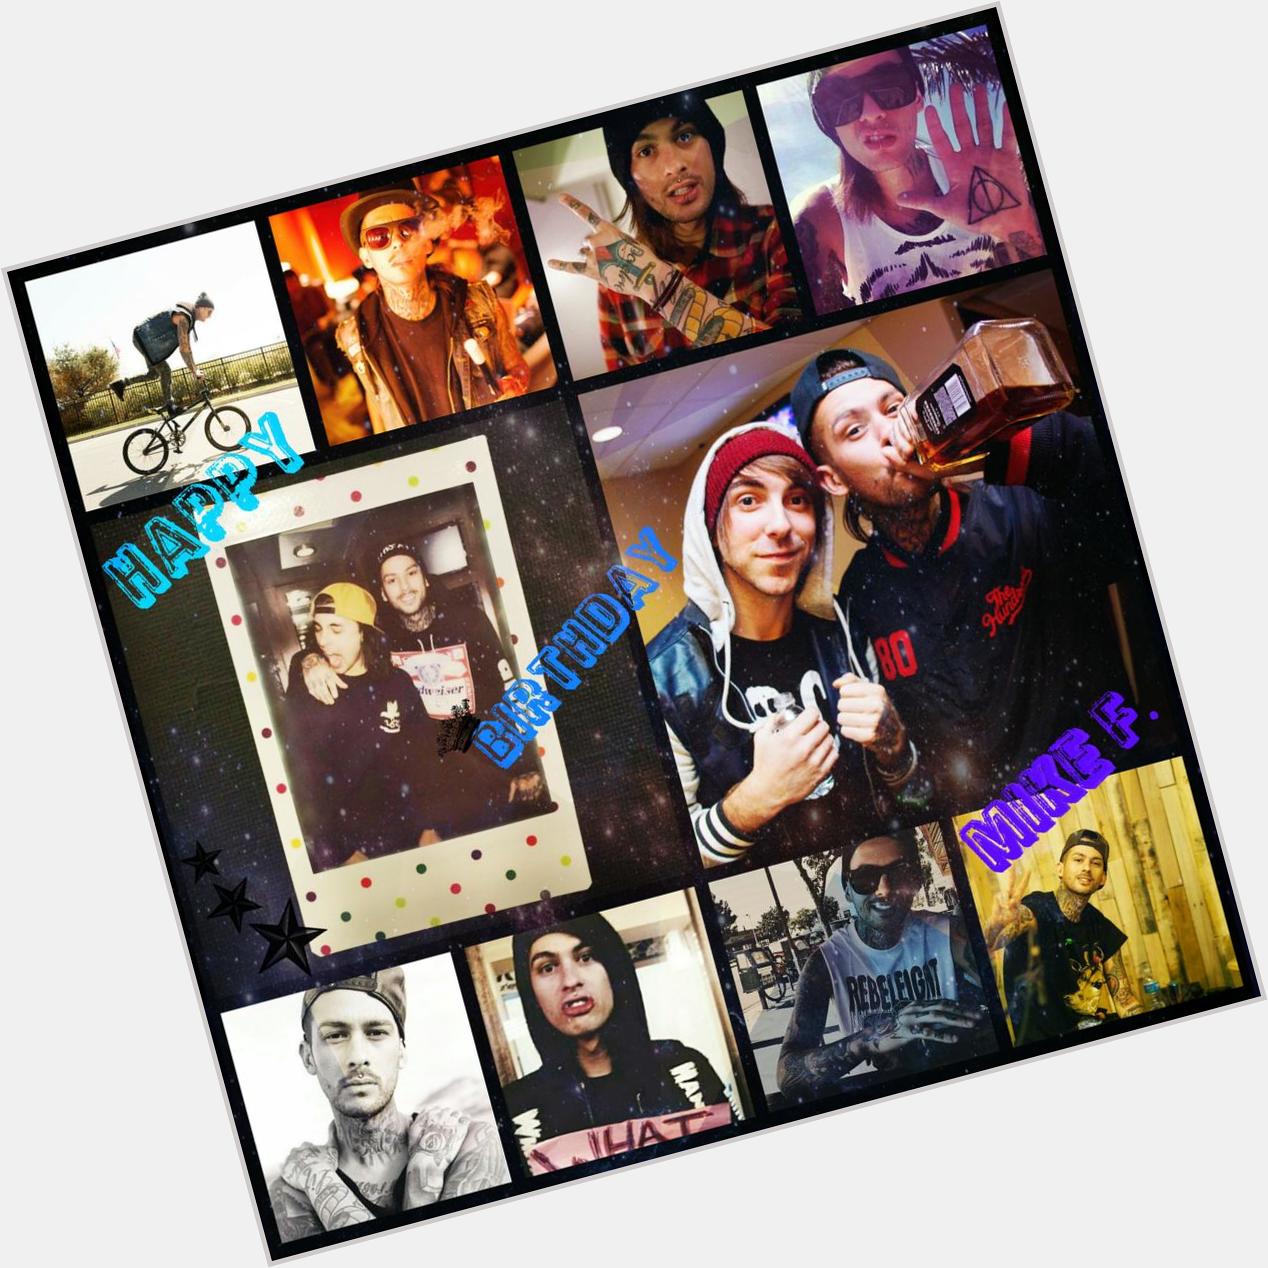  Happy Birthday Mike Fuentes 
Have fun today and dont forget to party tell youre numb B) (in a good wayo.o) 